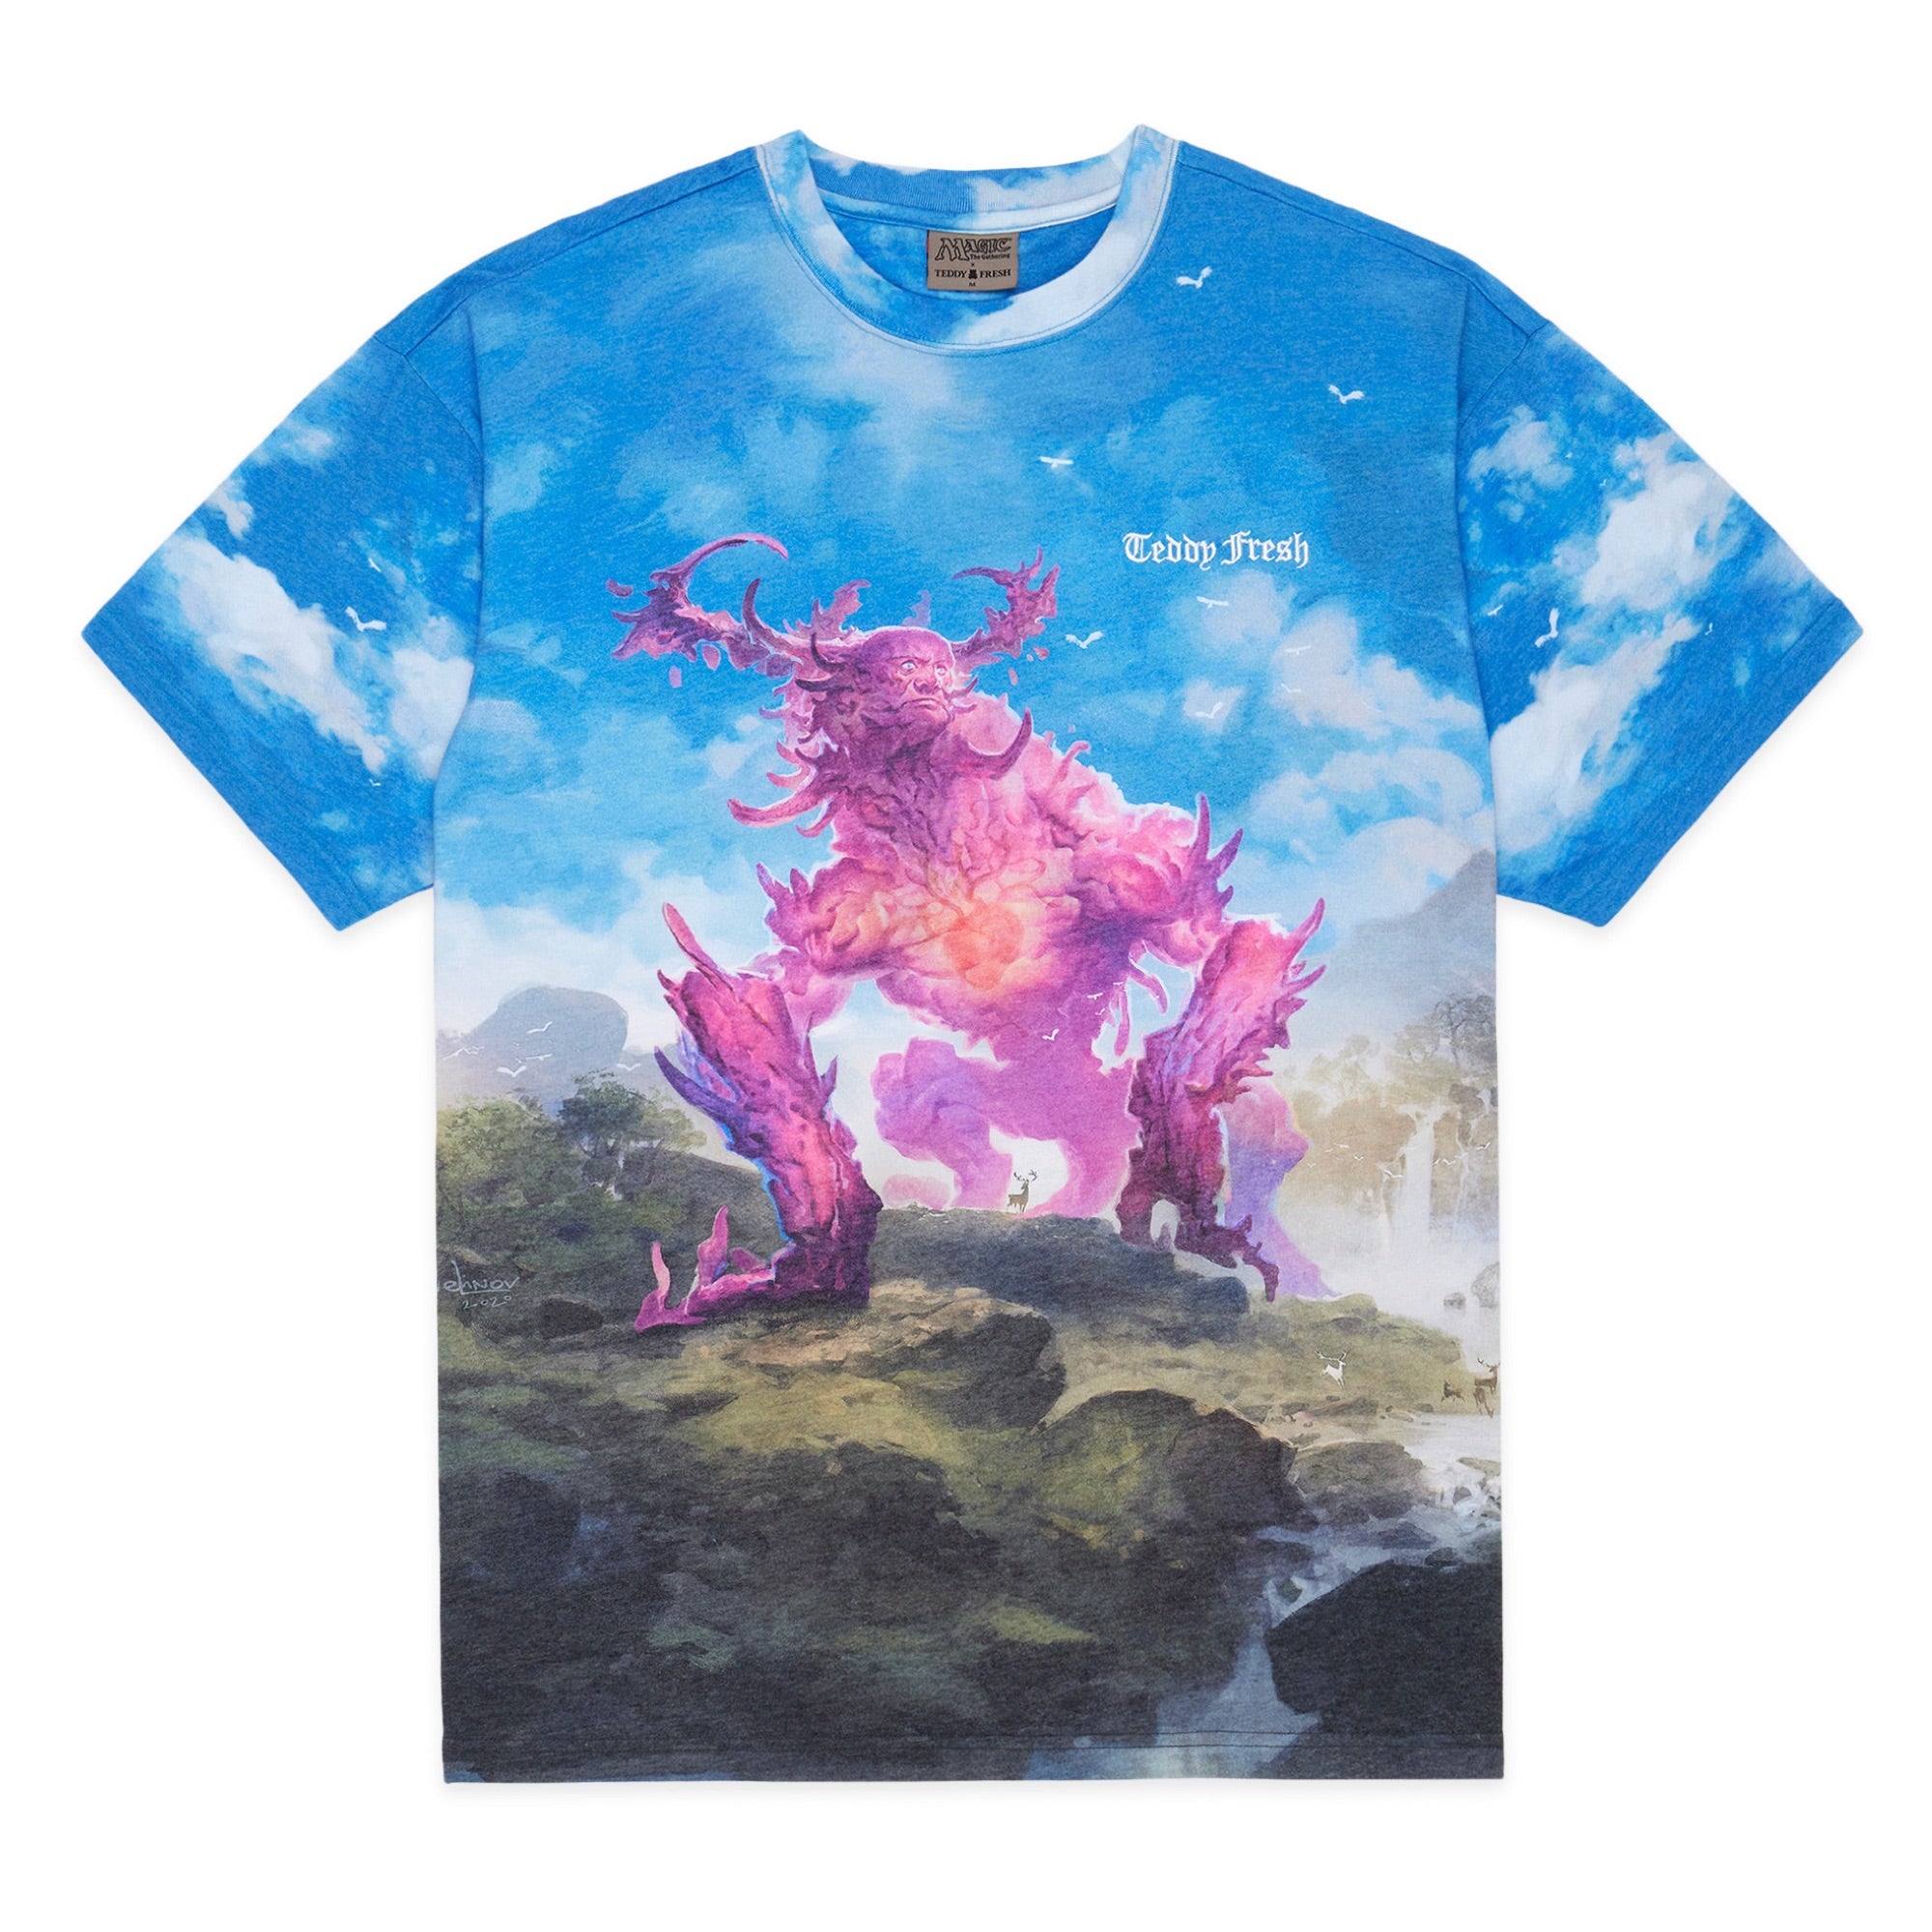 Teddy Fresh debuts Magic: The Gathering collection